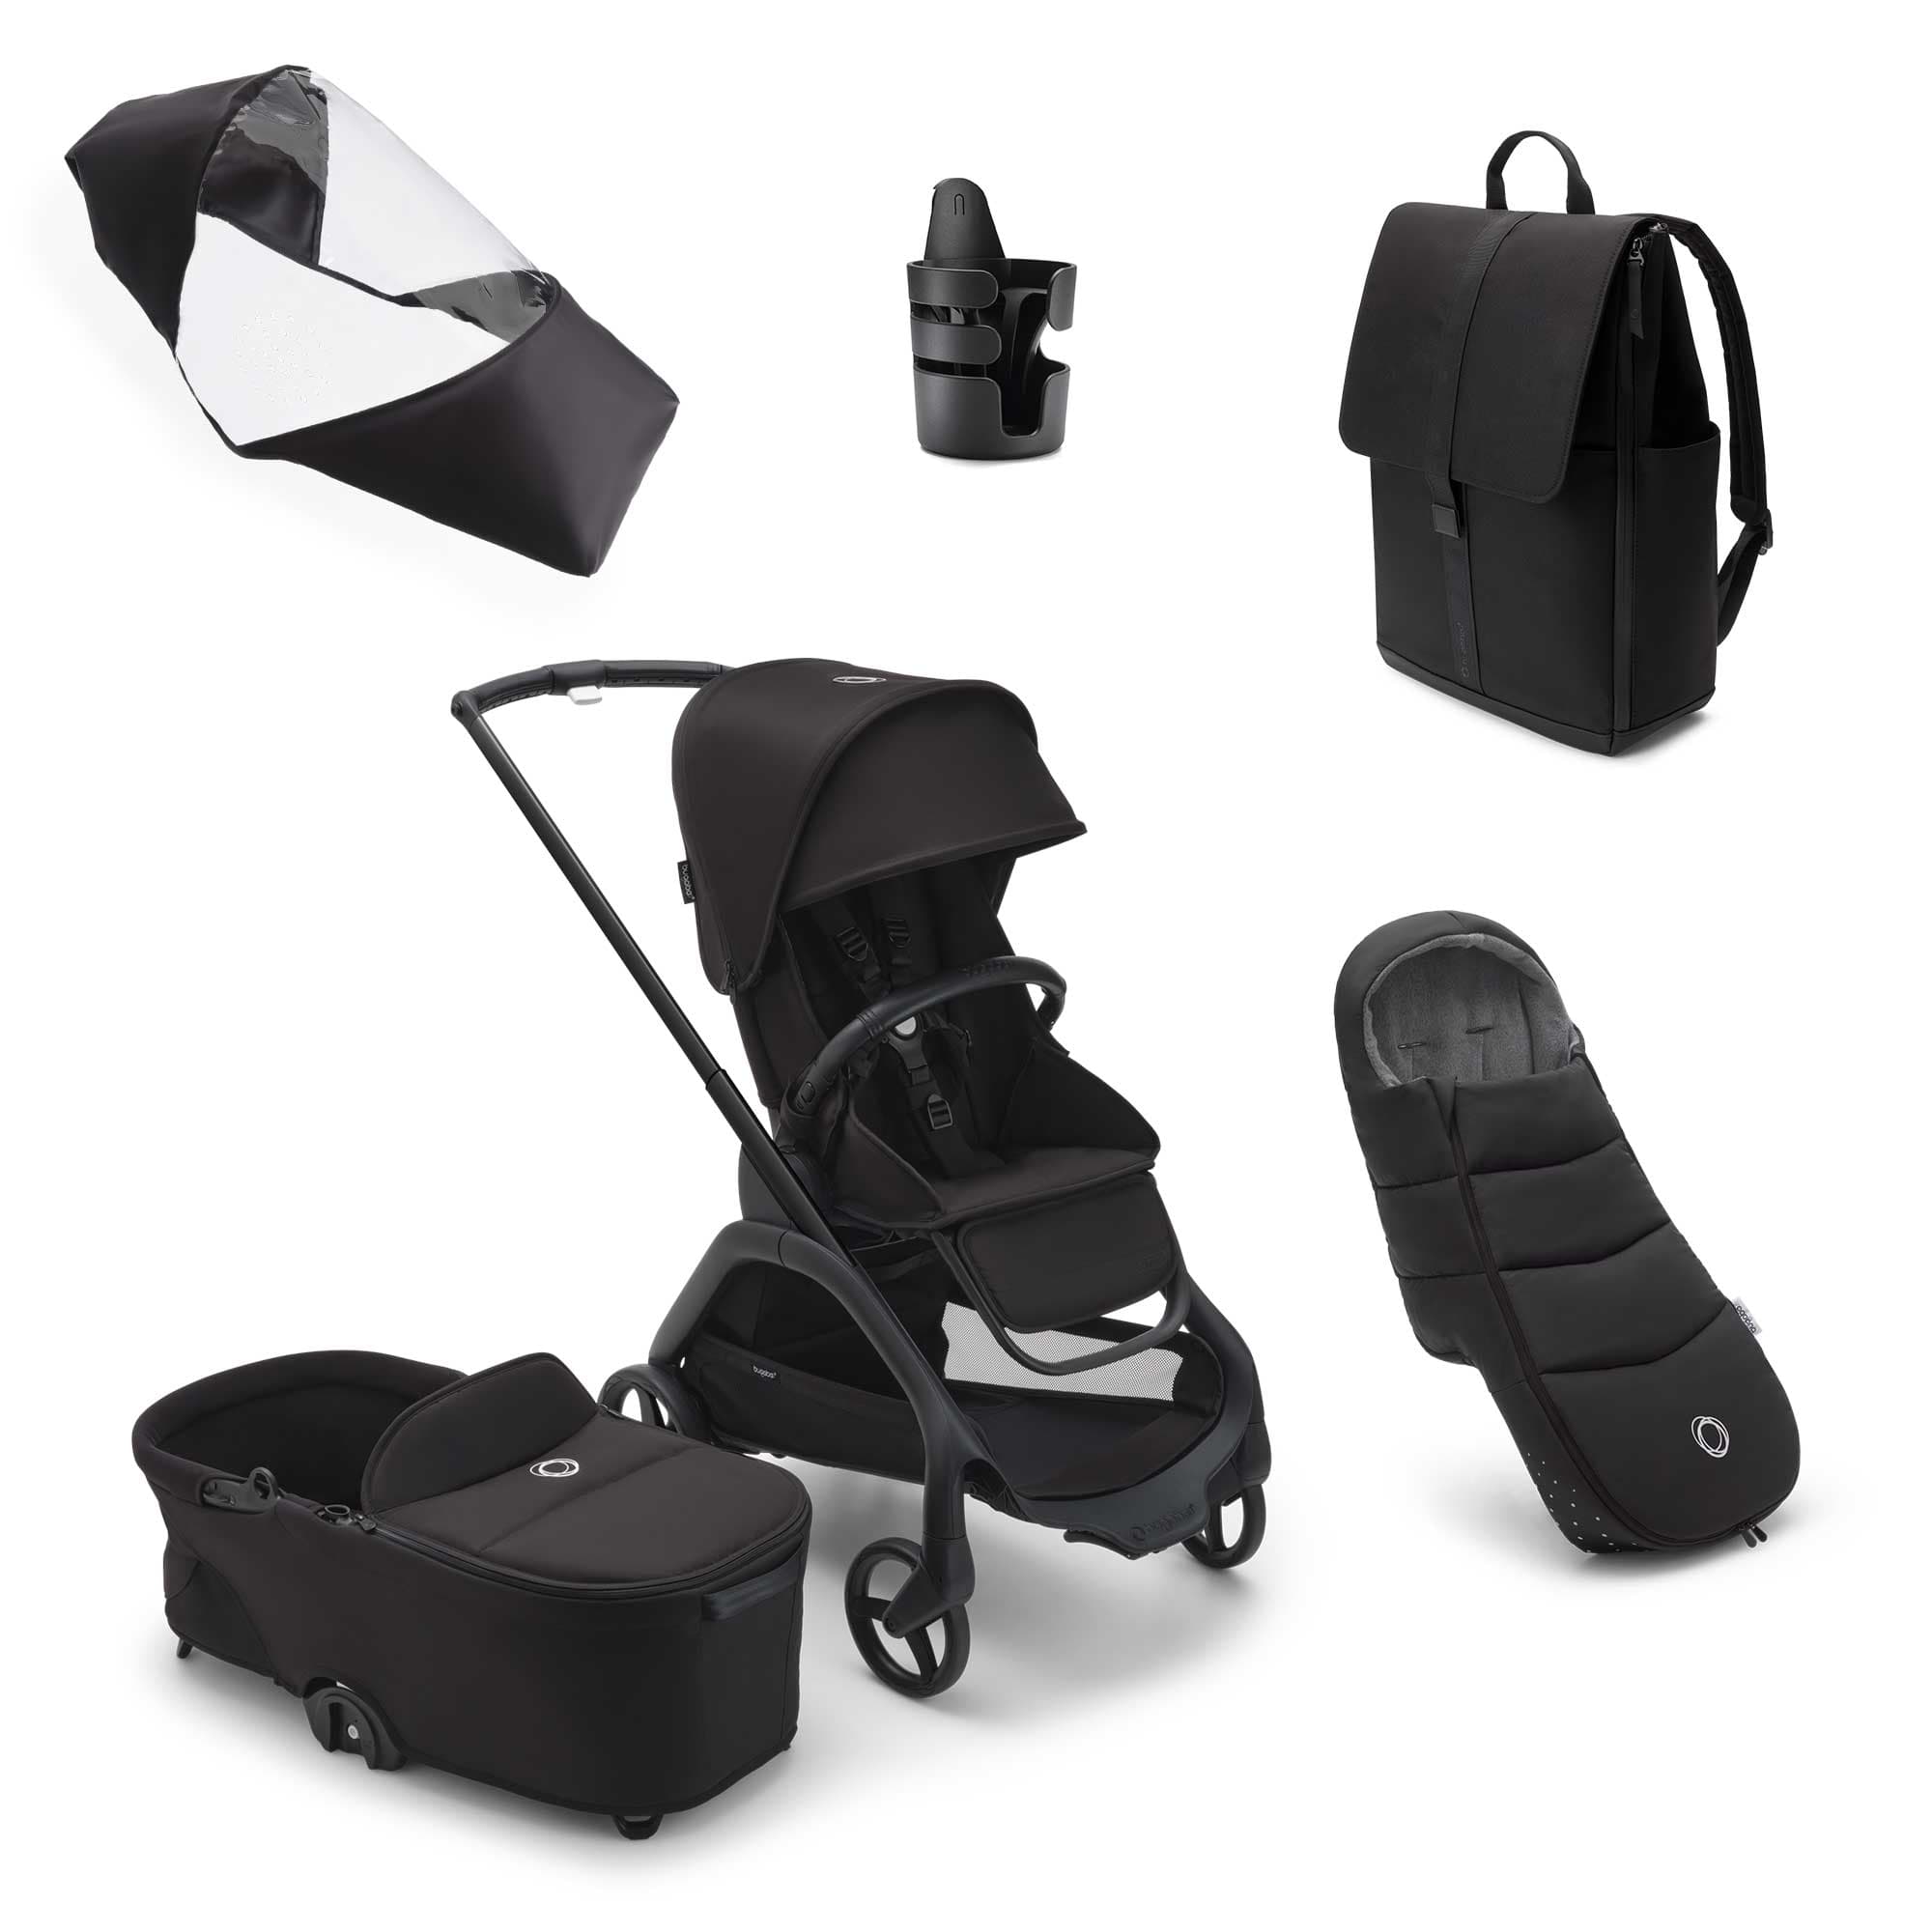 Bugaboo Baby Prams Bugaboo Dragonfly Complete Bundle in Black/Midnight Black 13813-BLK-MID-BLK